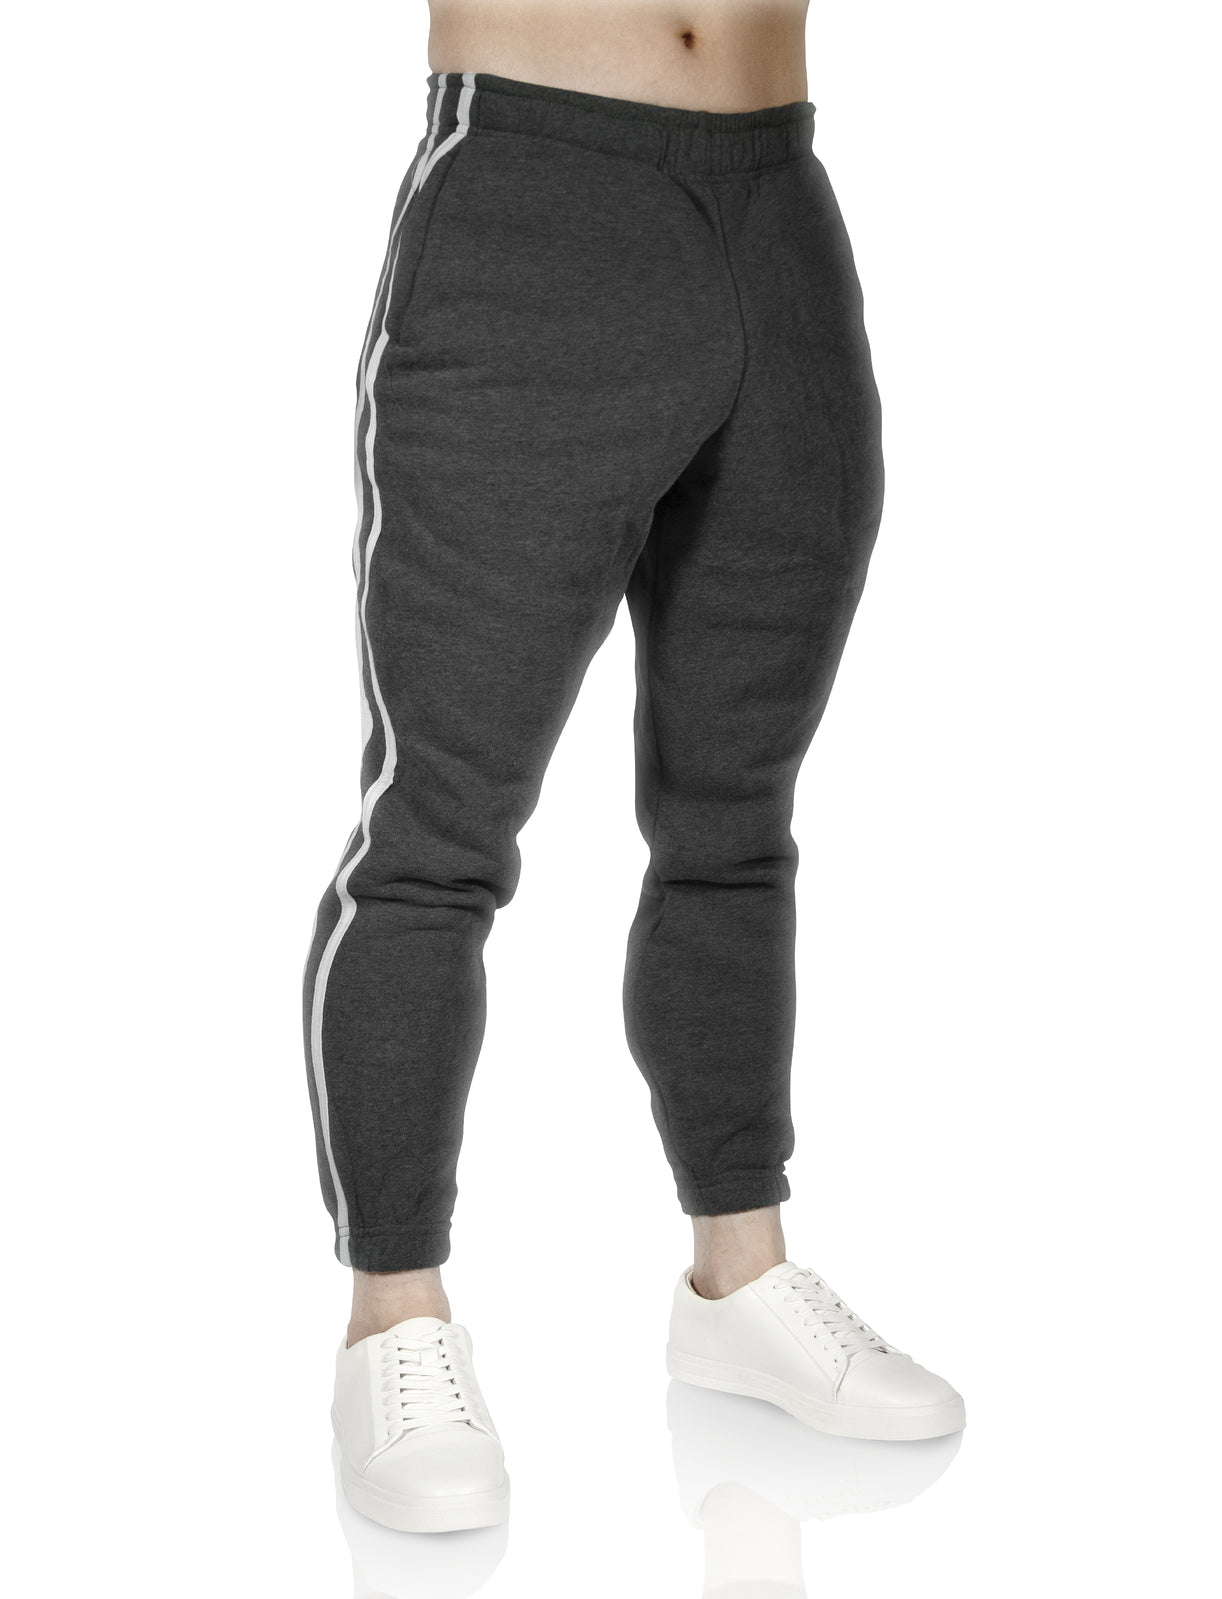 Mens Fleece Skinny Track Pants Jogger Gym Casual Sweat Trackies Warm Trousers - Charcoal Marle/White Stripe - S